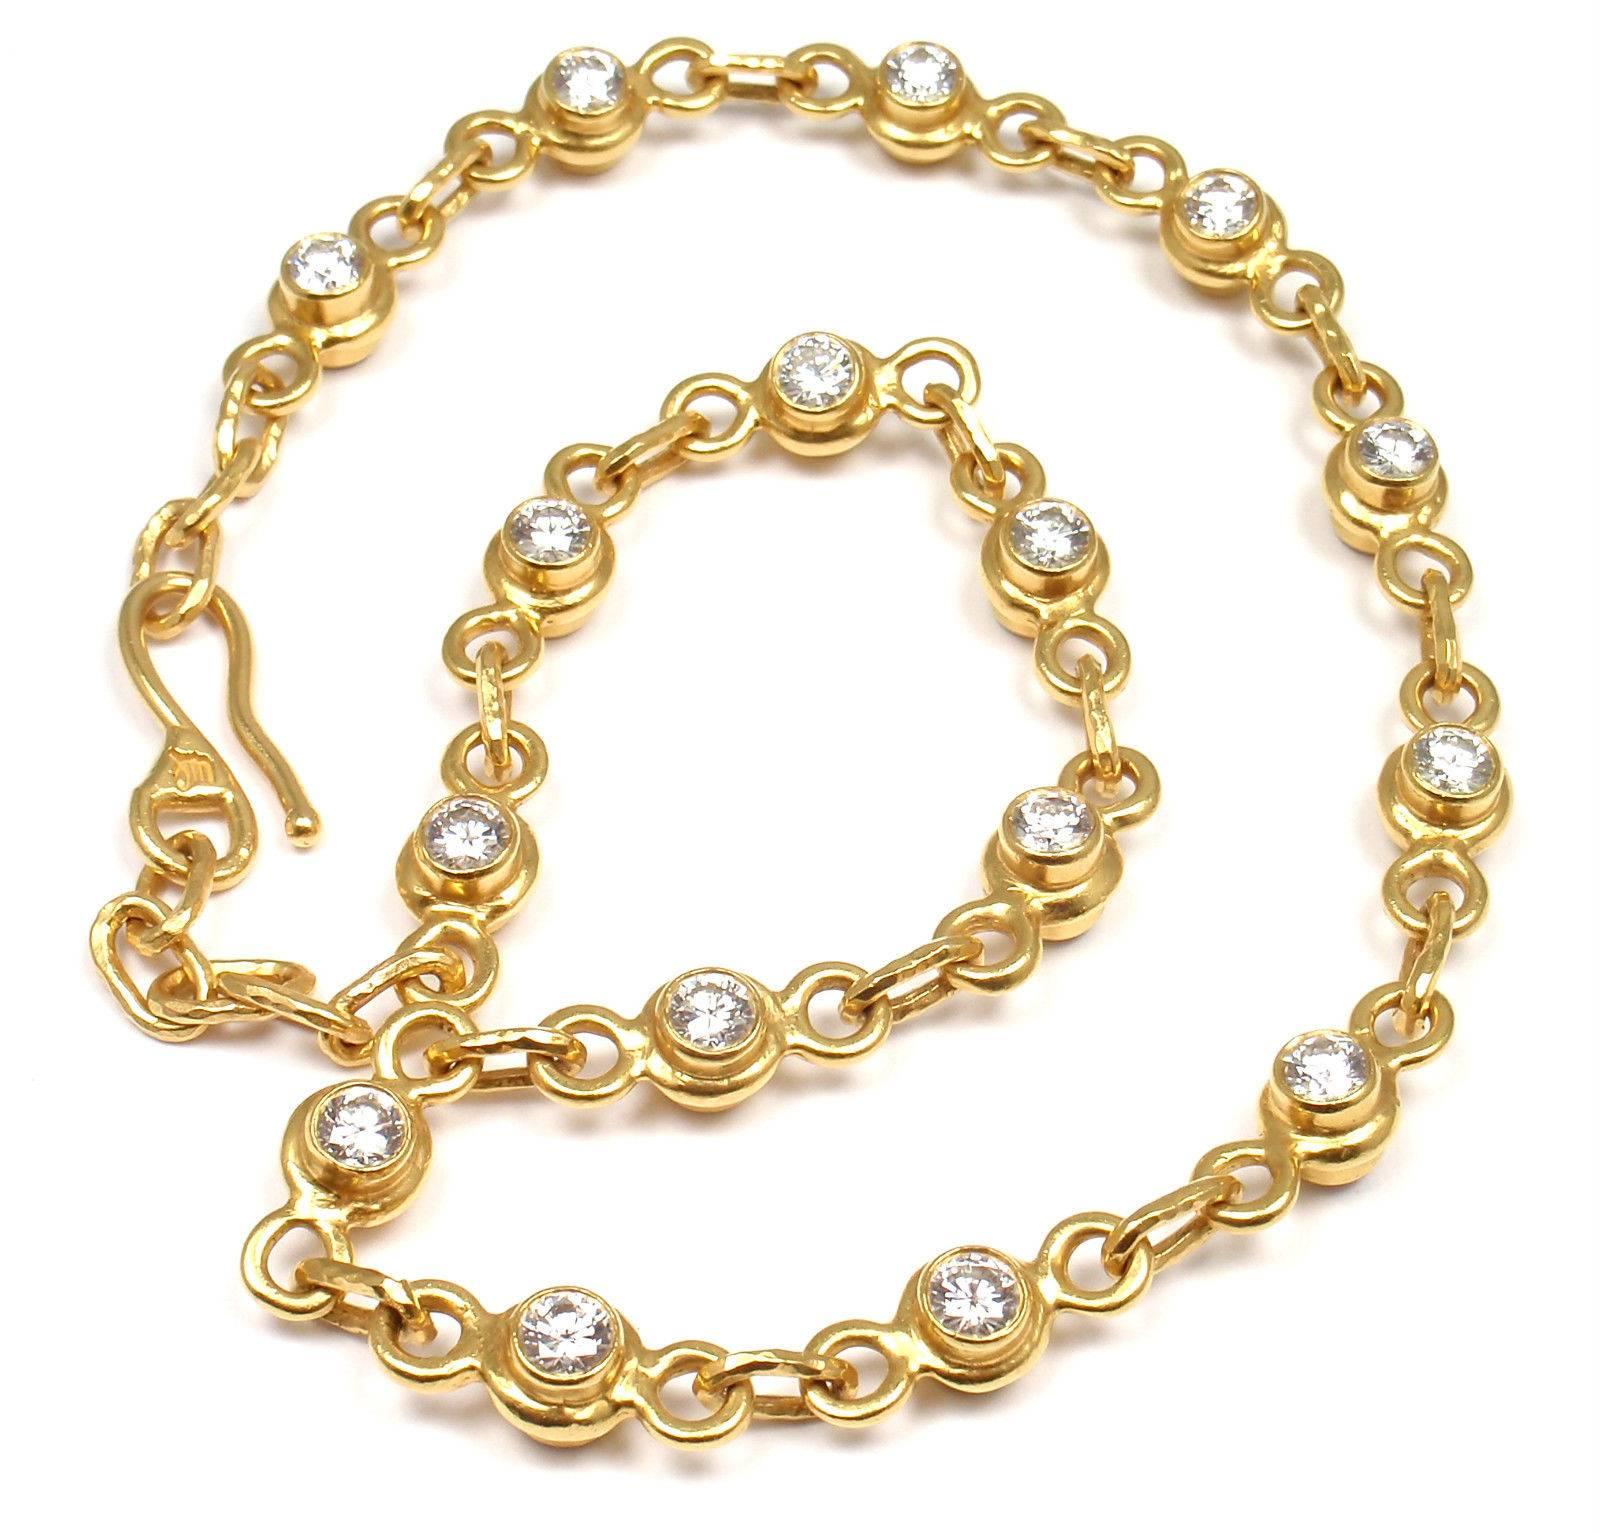 22k Yellow Gold Diamond And Yellow Sapphire Link Necklace by Jean Mahie. 
With 16 round brilliant cut diamonds VS1 clarity, E color total weight approx. 8ct
16 round yellow sapphire stones total weight approx. 8ct

Details: 
Length: 18